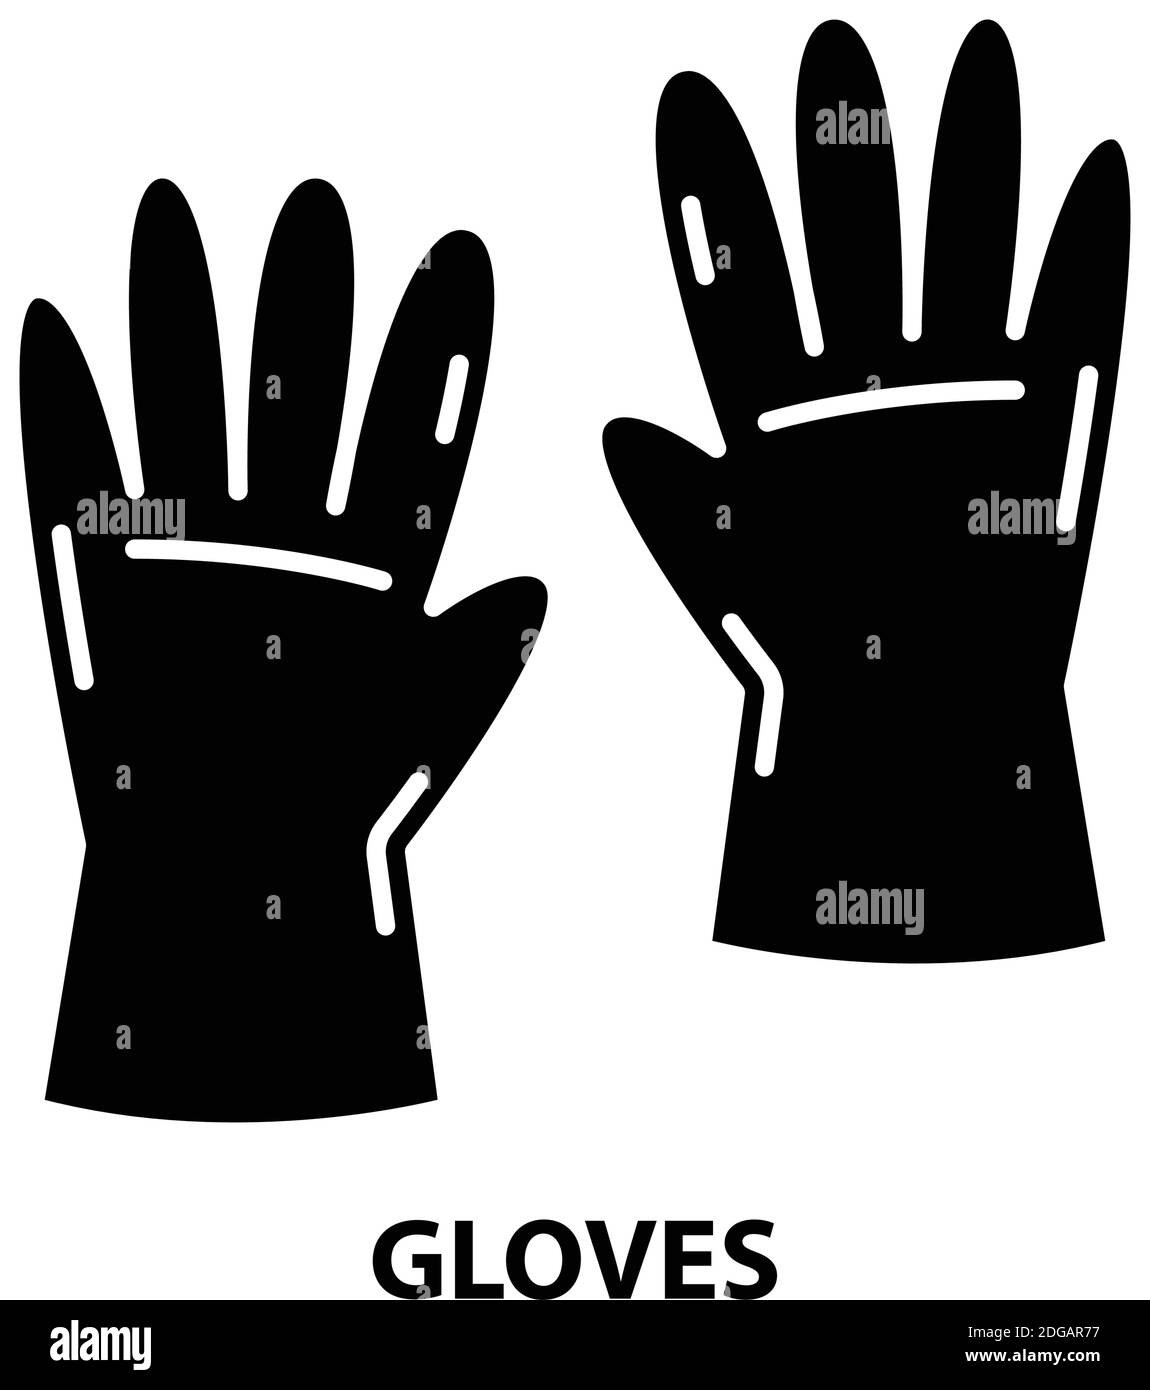 gloves icon, black vector sign with editable strokes, concept illustration Stock Vector